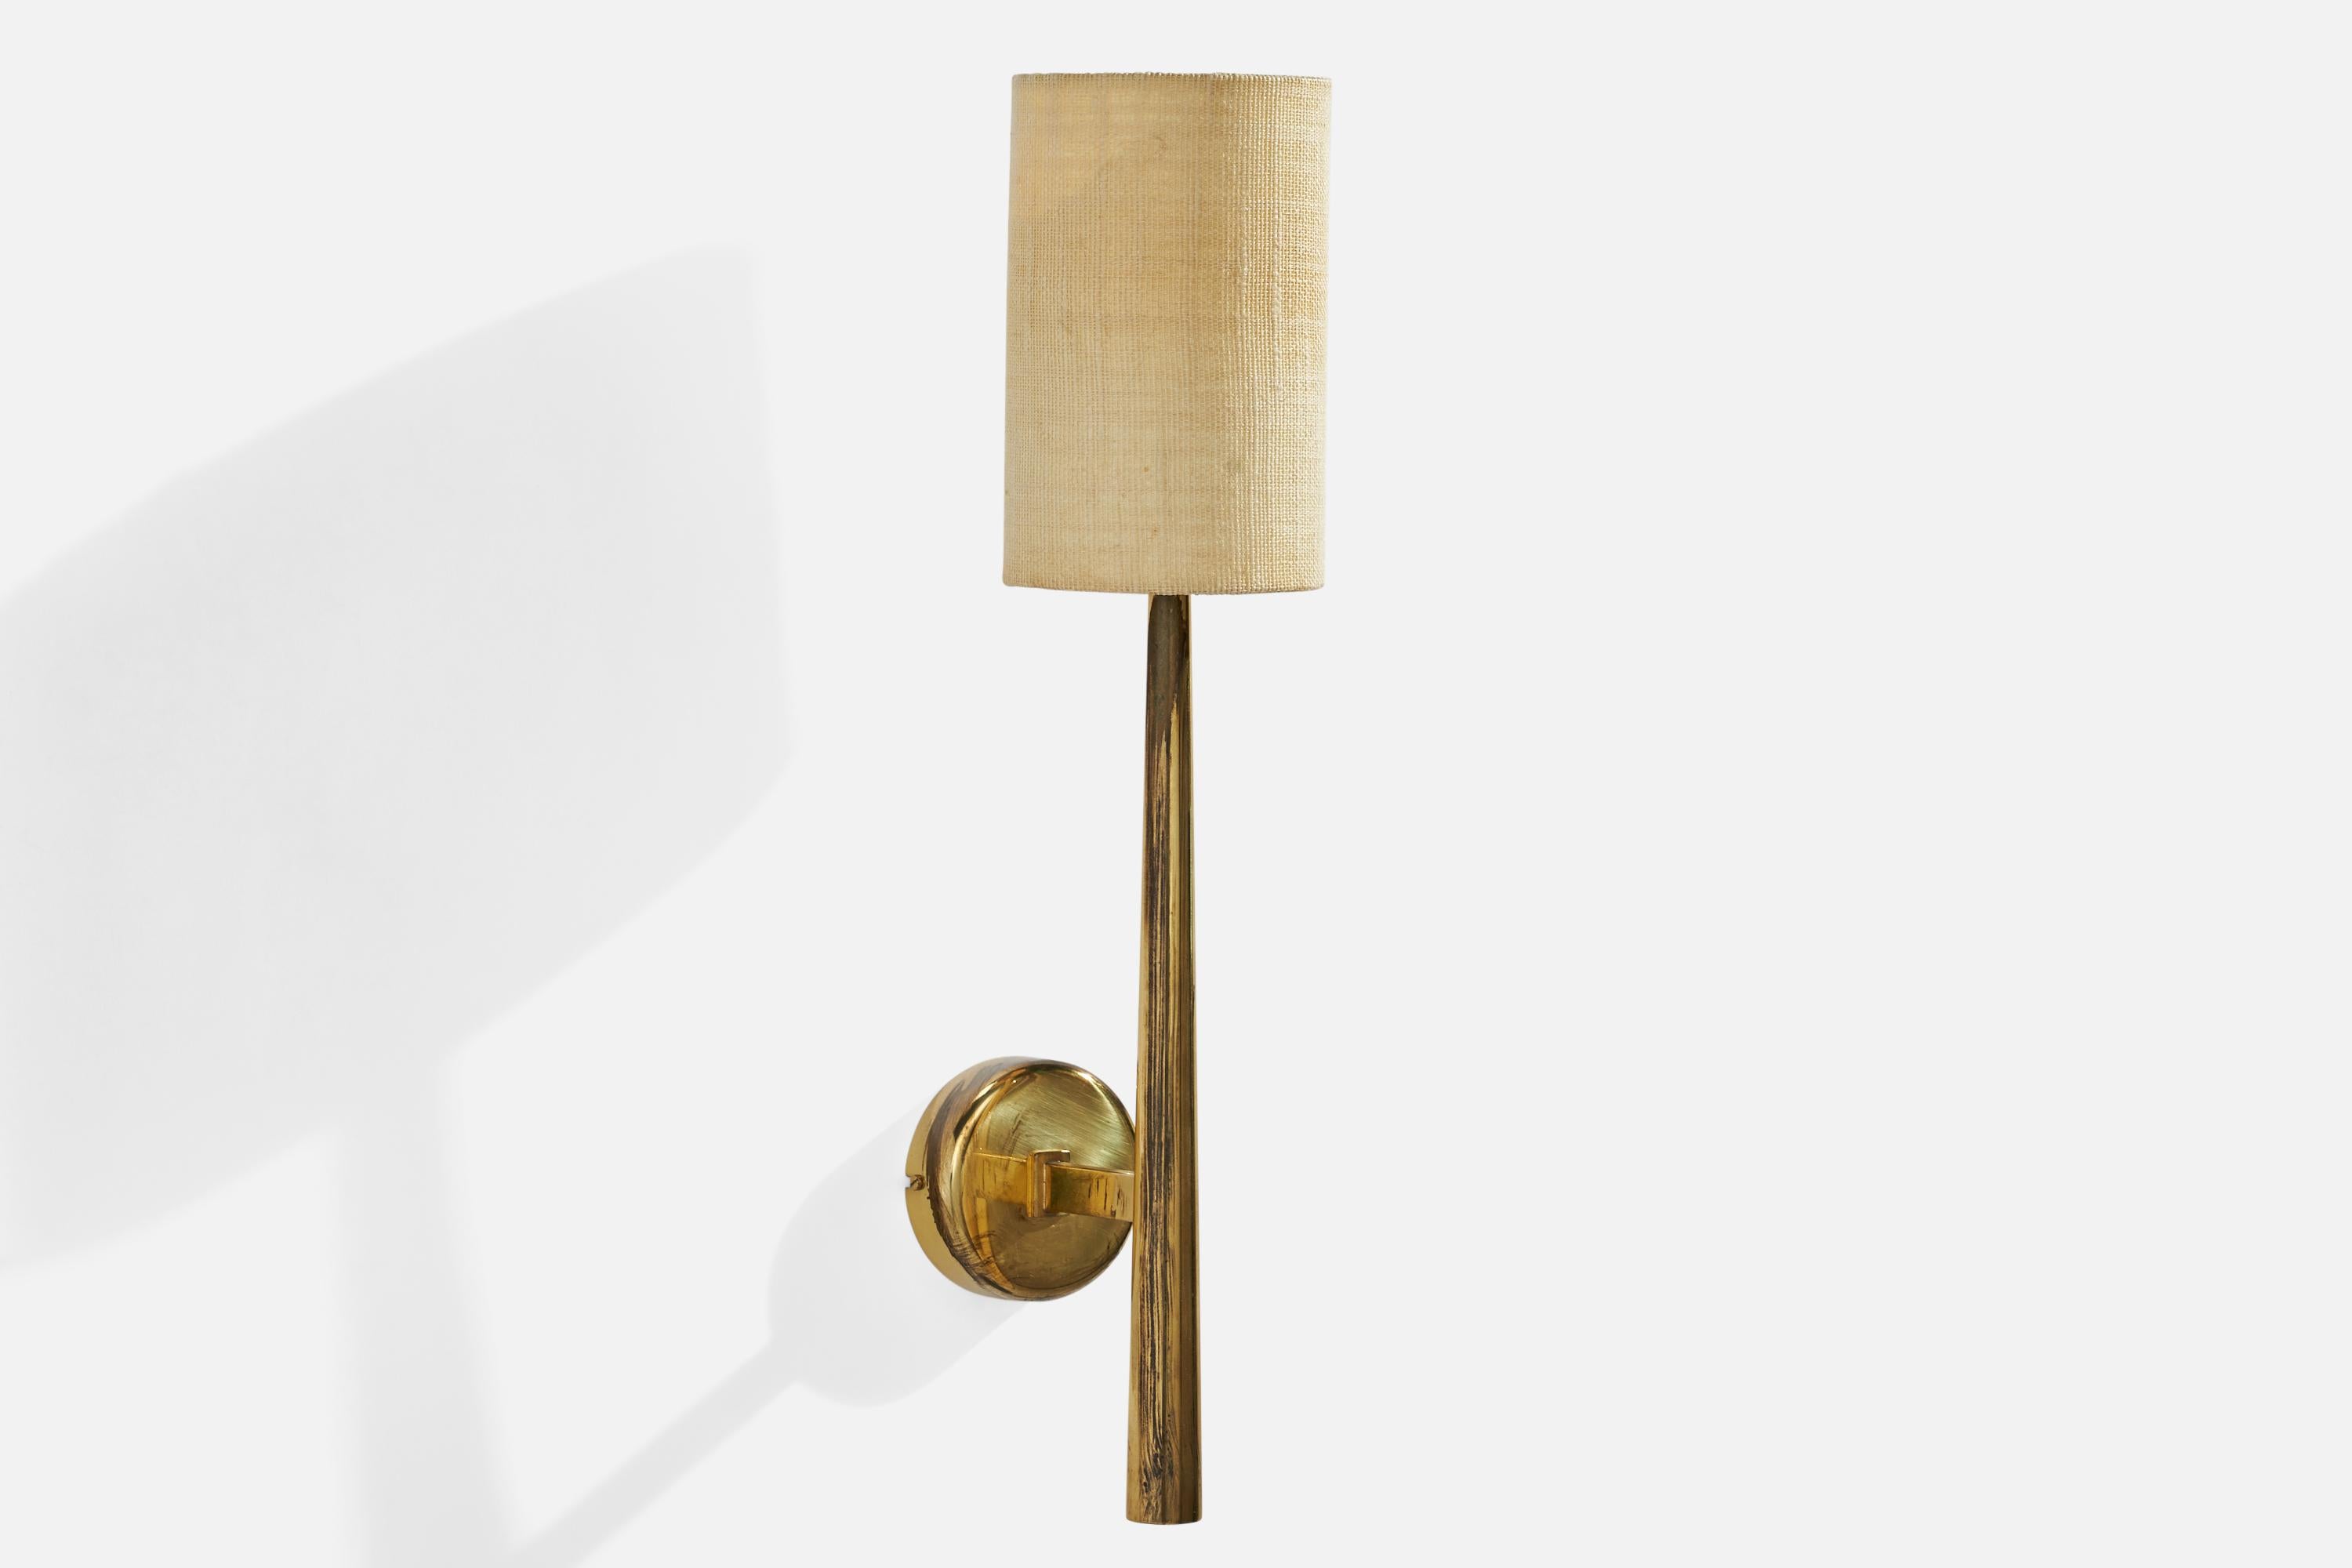 A brass and fabric wall light designed and produced in Denmark, 1950s.

Overall Dimensions (inches): 19”  H x 4.25”  W x 6”  D
Back Plate Dimensions (inches): 3.25”  H x 3.25” W x 1.0” D
Bulb Specifications: E-14 Bulb
Number of Sockets: 1
All